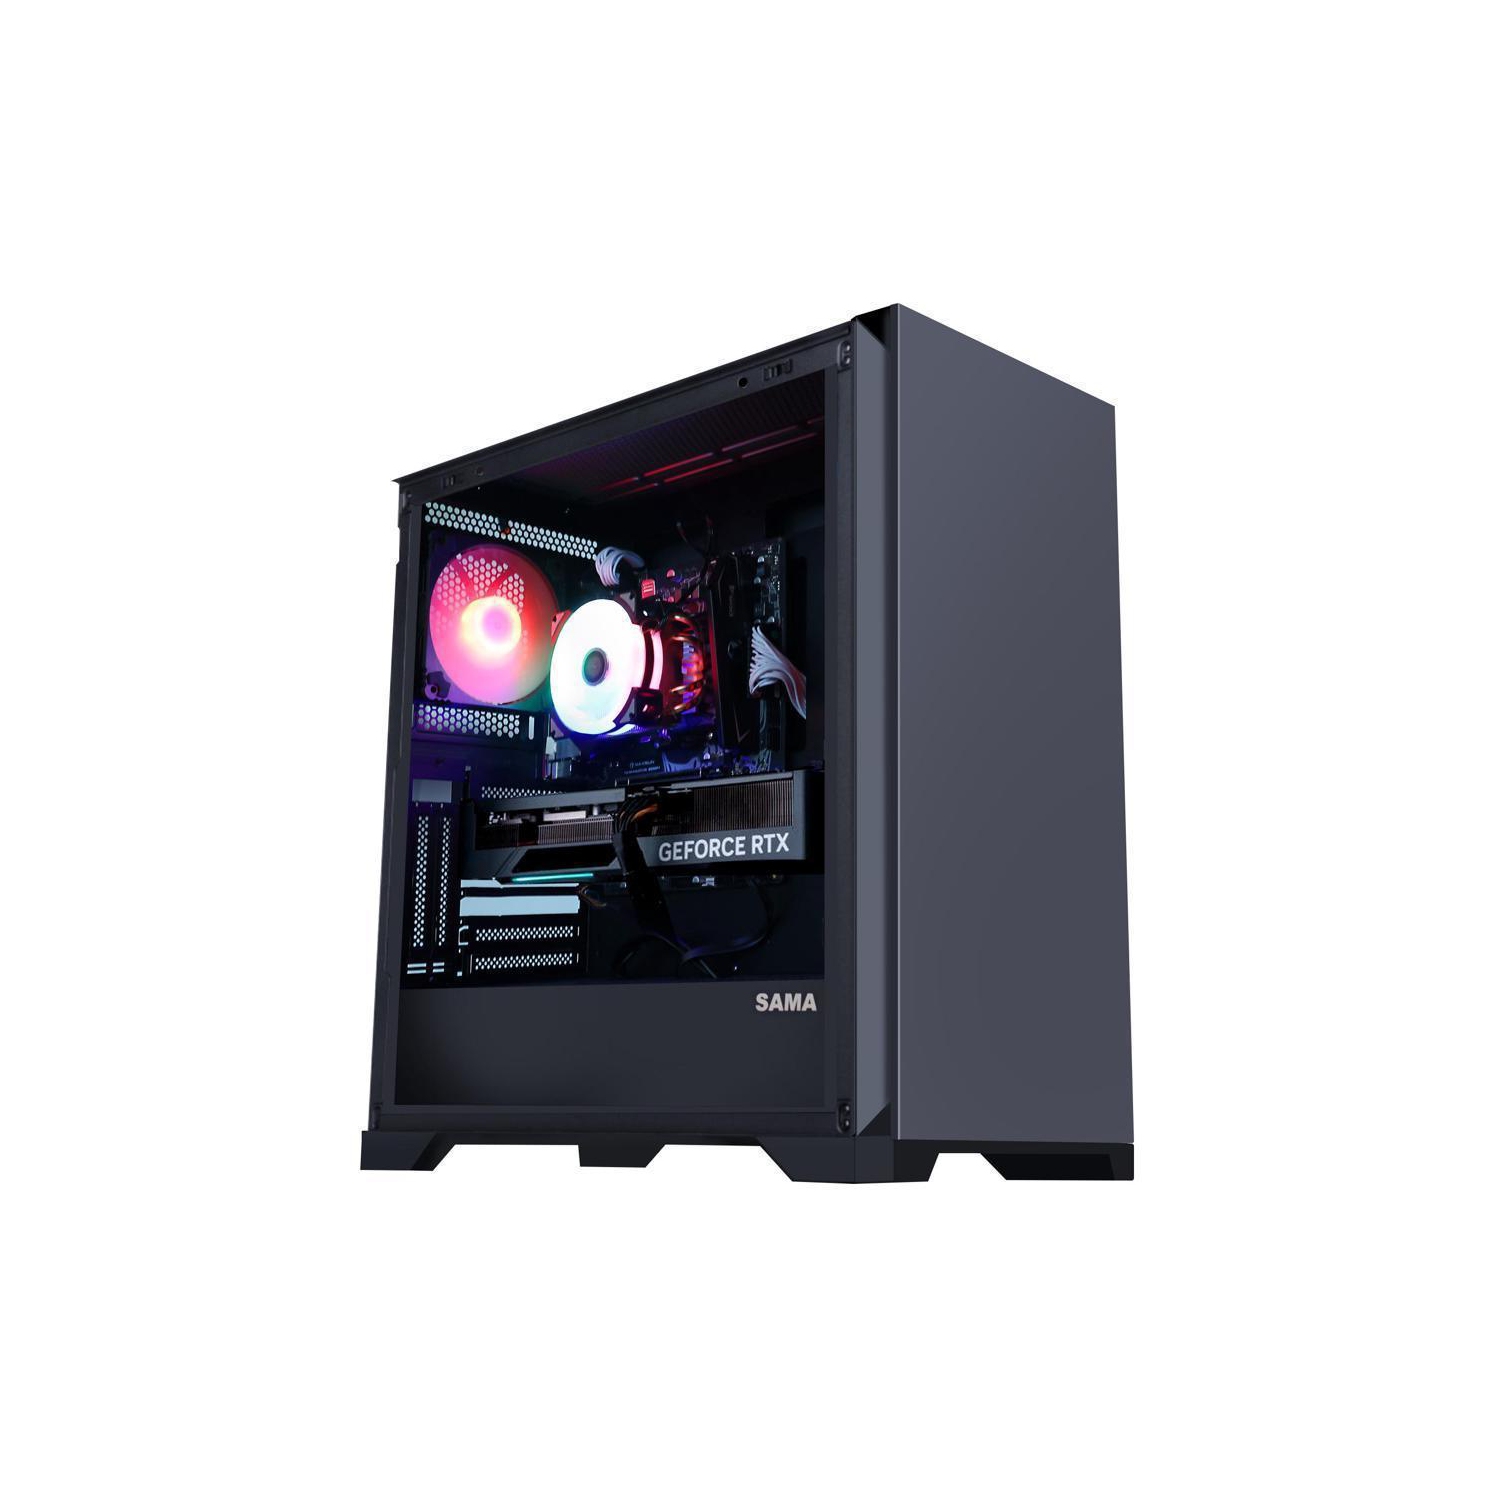 Hoengager Ares Gaming - Intel Core i5-12400F 6-Core 2.5 GHz- GeForce GTX 1650- 16GB DDR4 3200MHz - 500GB M.2 + 2TB 2.5'' SATA SSD- WIFI -RGB Fans - Windows 11 Pro Computer